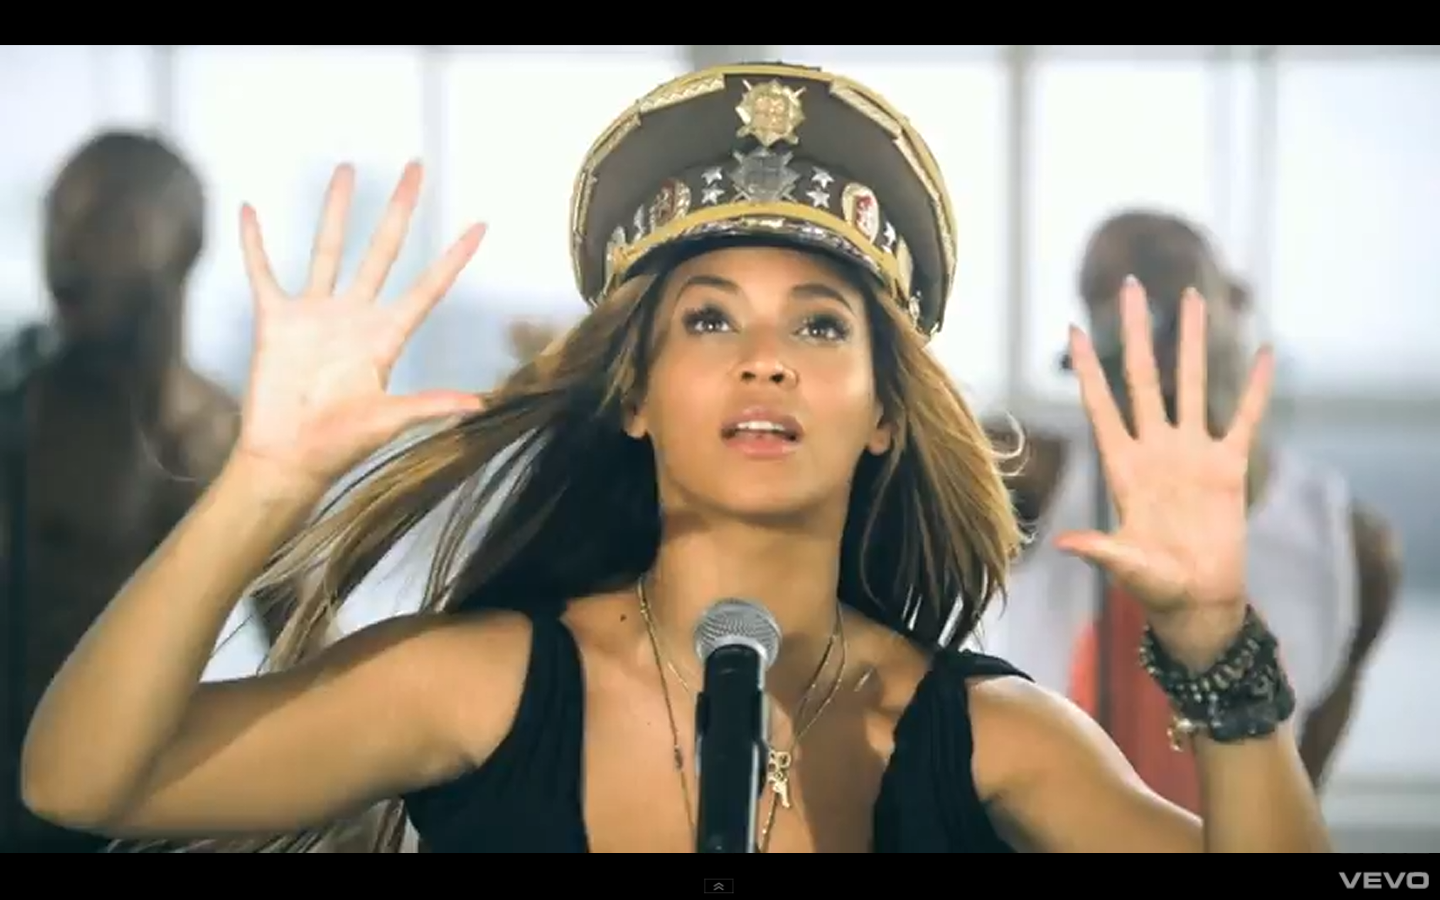 http://3.bp.blogspot.com/-h_Uaox_Qo_M/Tu38T3b1q7I/AAAAAAAAAYk/4vFIo0A8Rfg/s1600/Beyonce-LoveOnTop.png